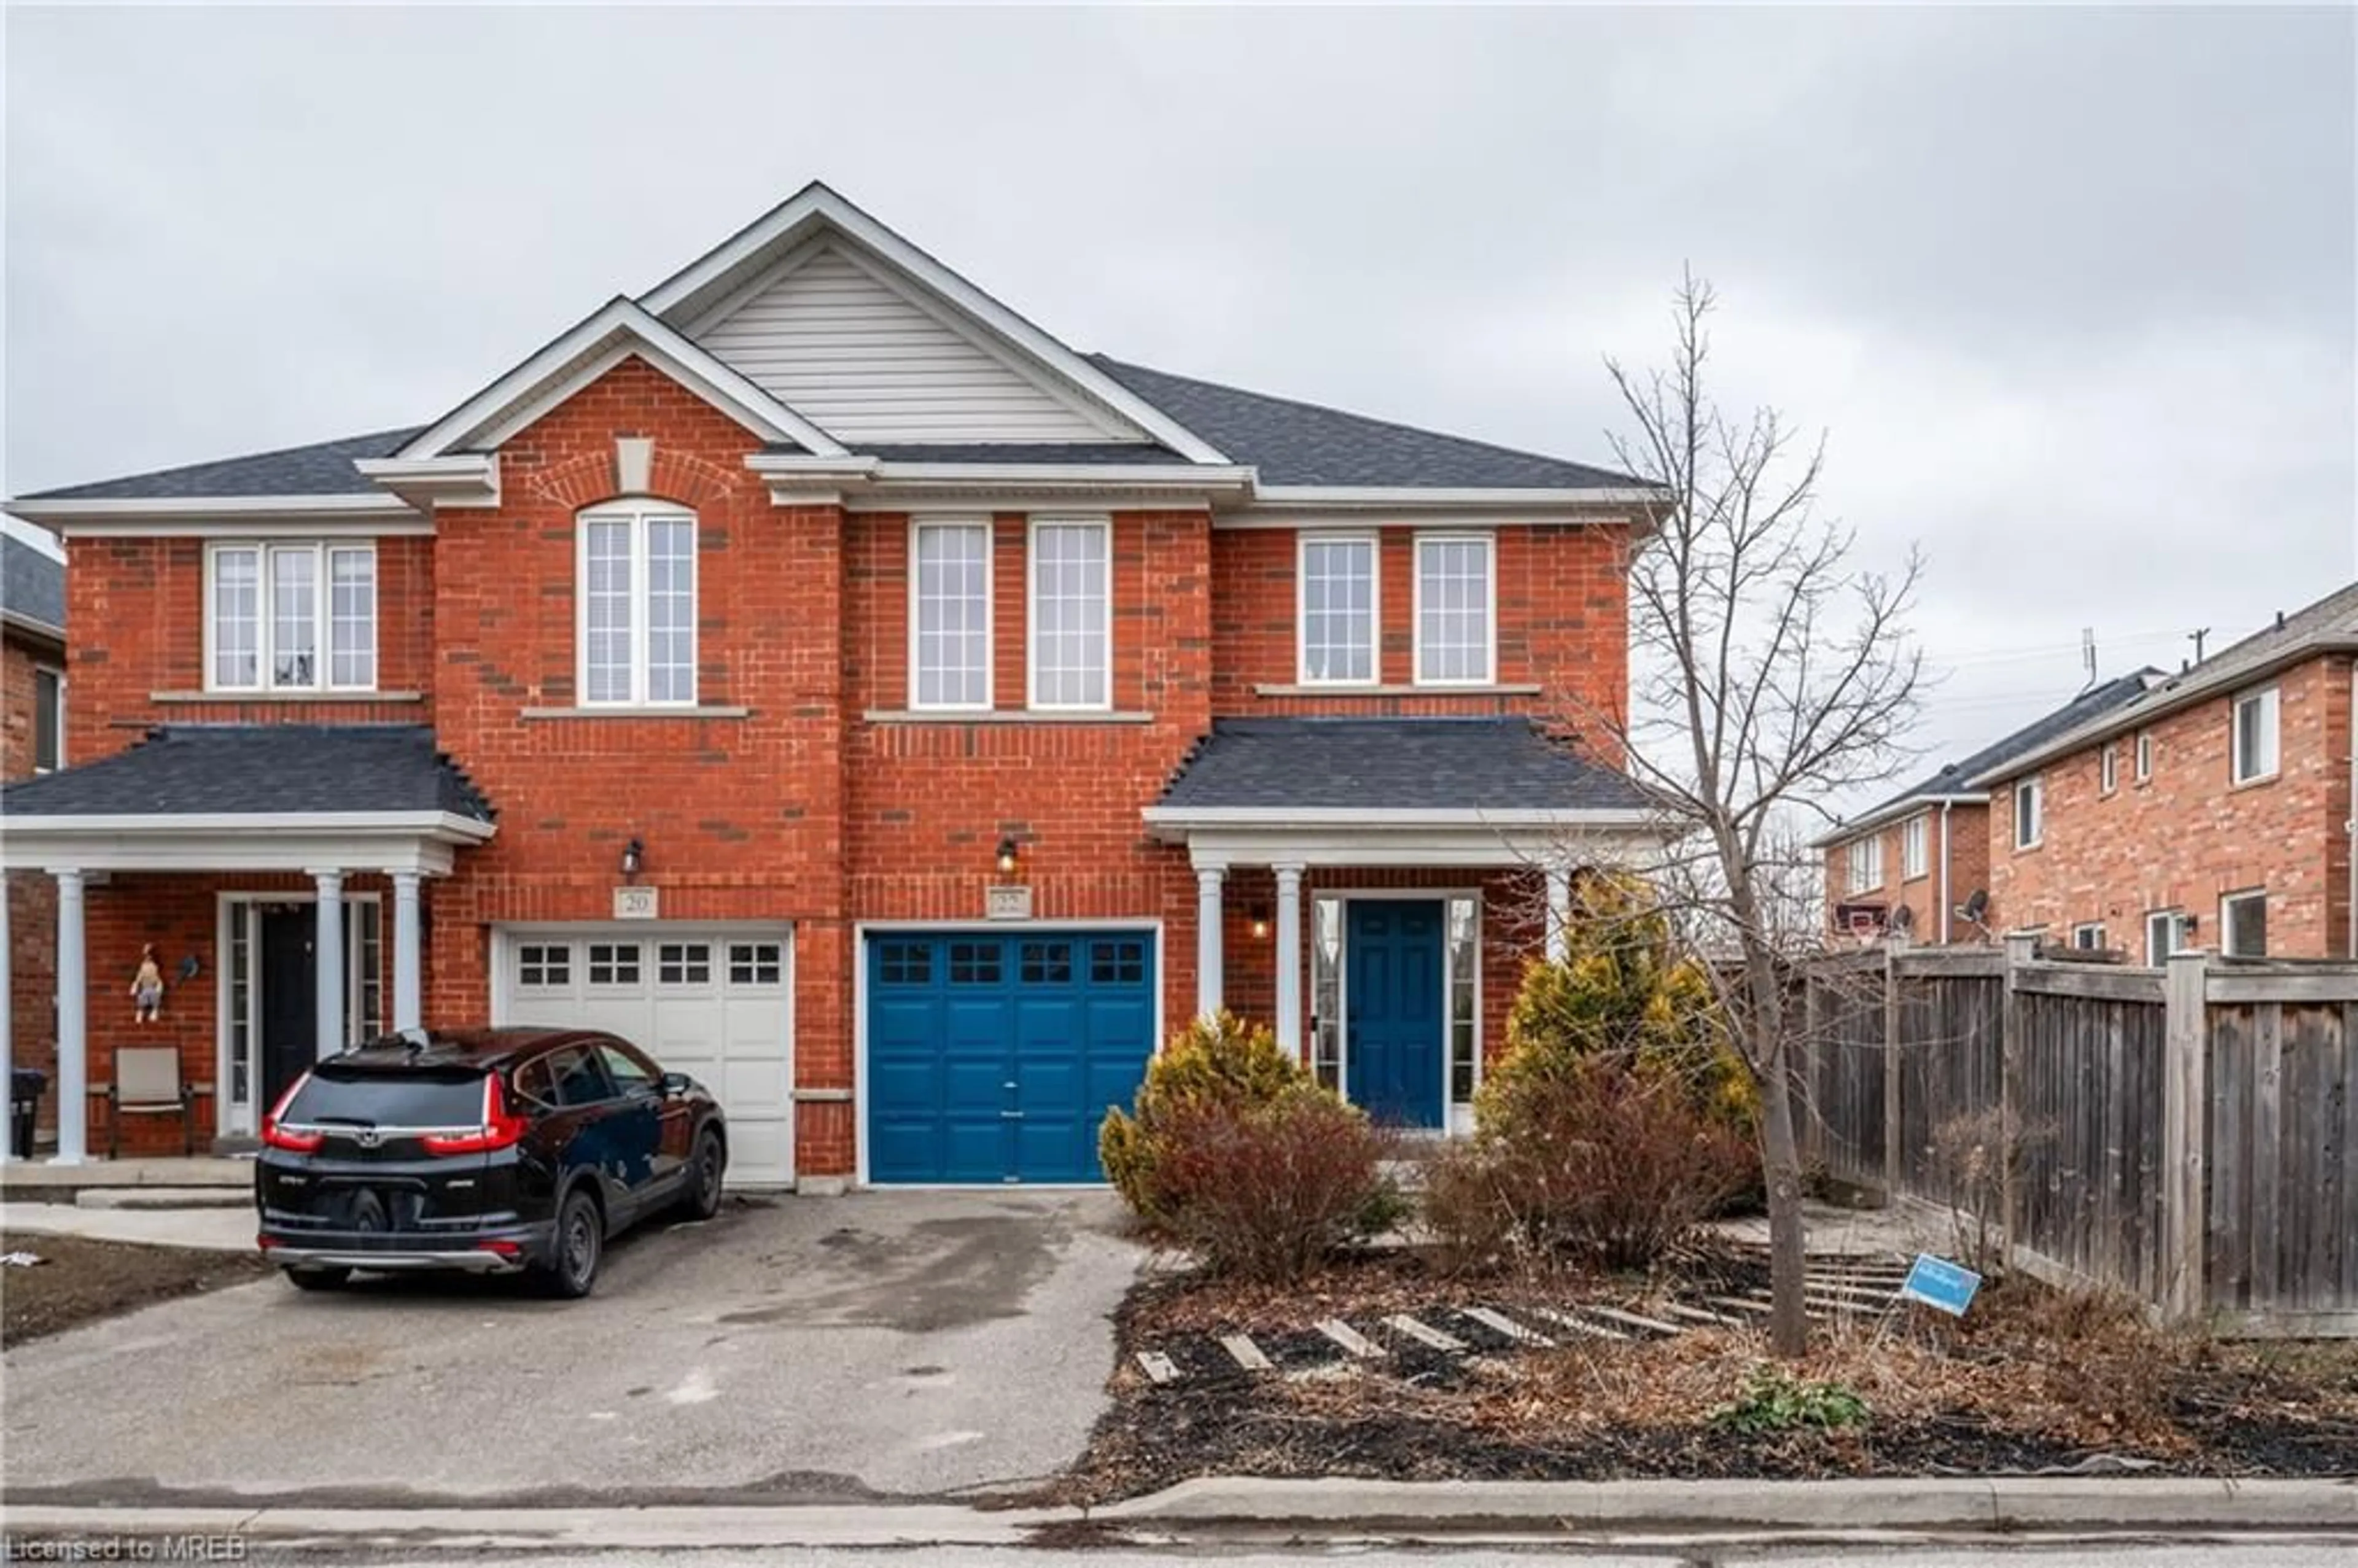 Home with brick exterior material for 22 Albery Rd, Brampton Ontario L7A 0K7